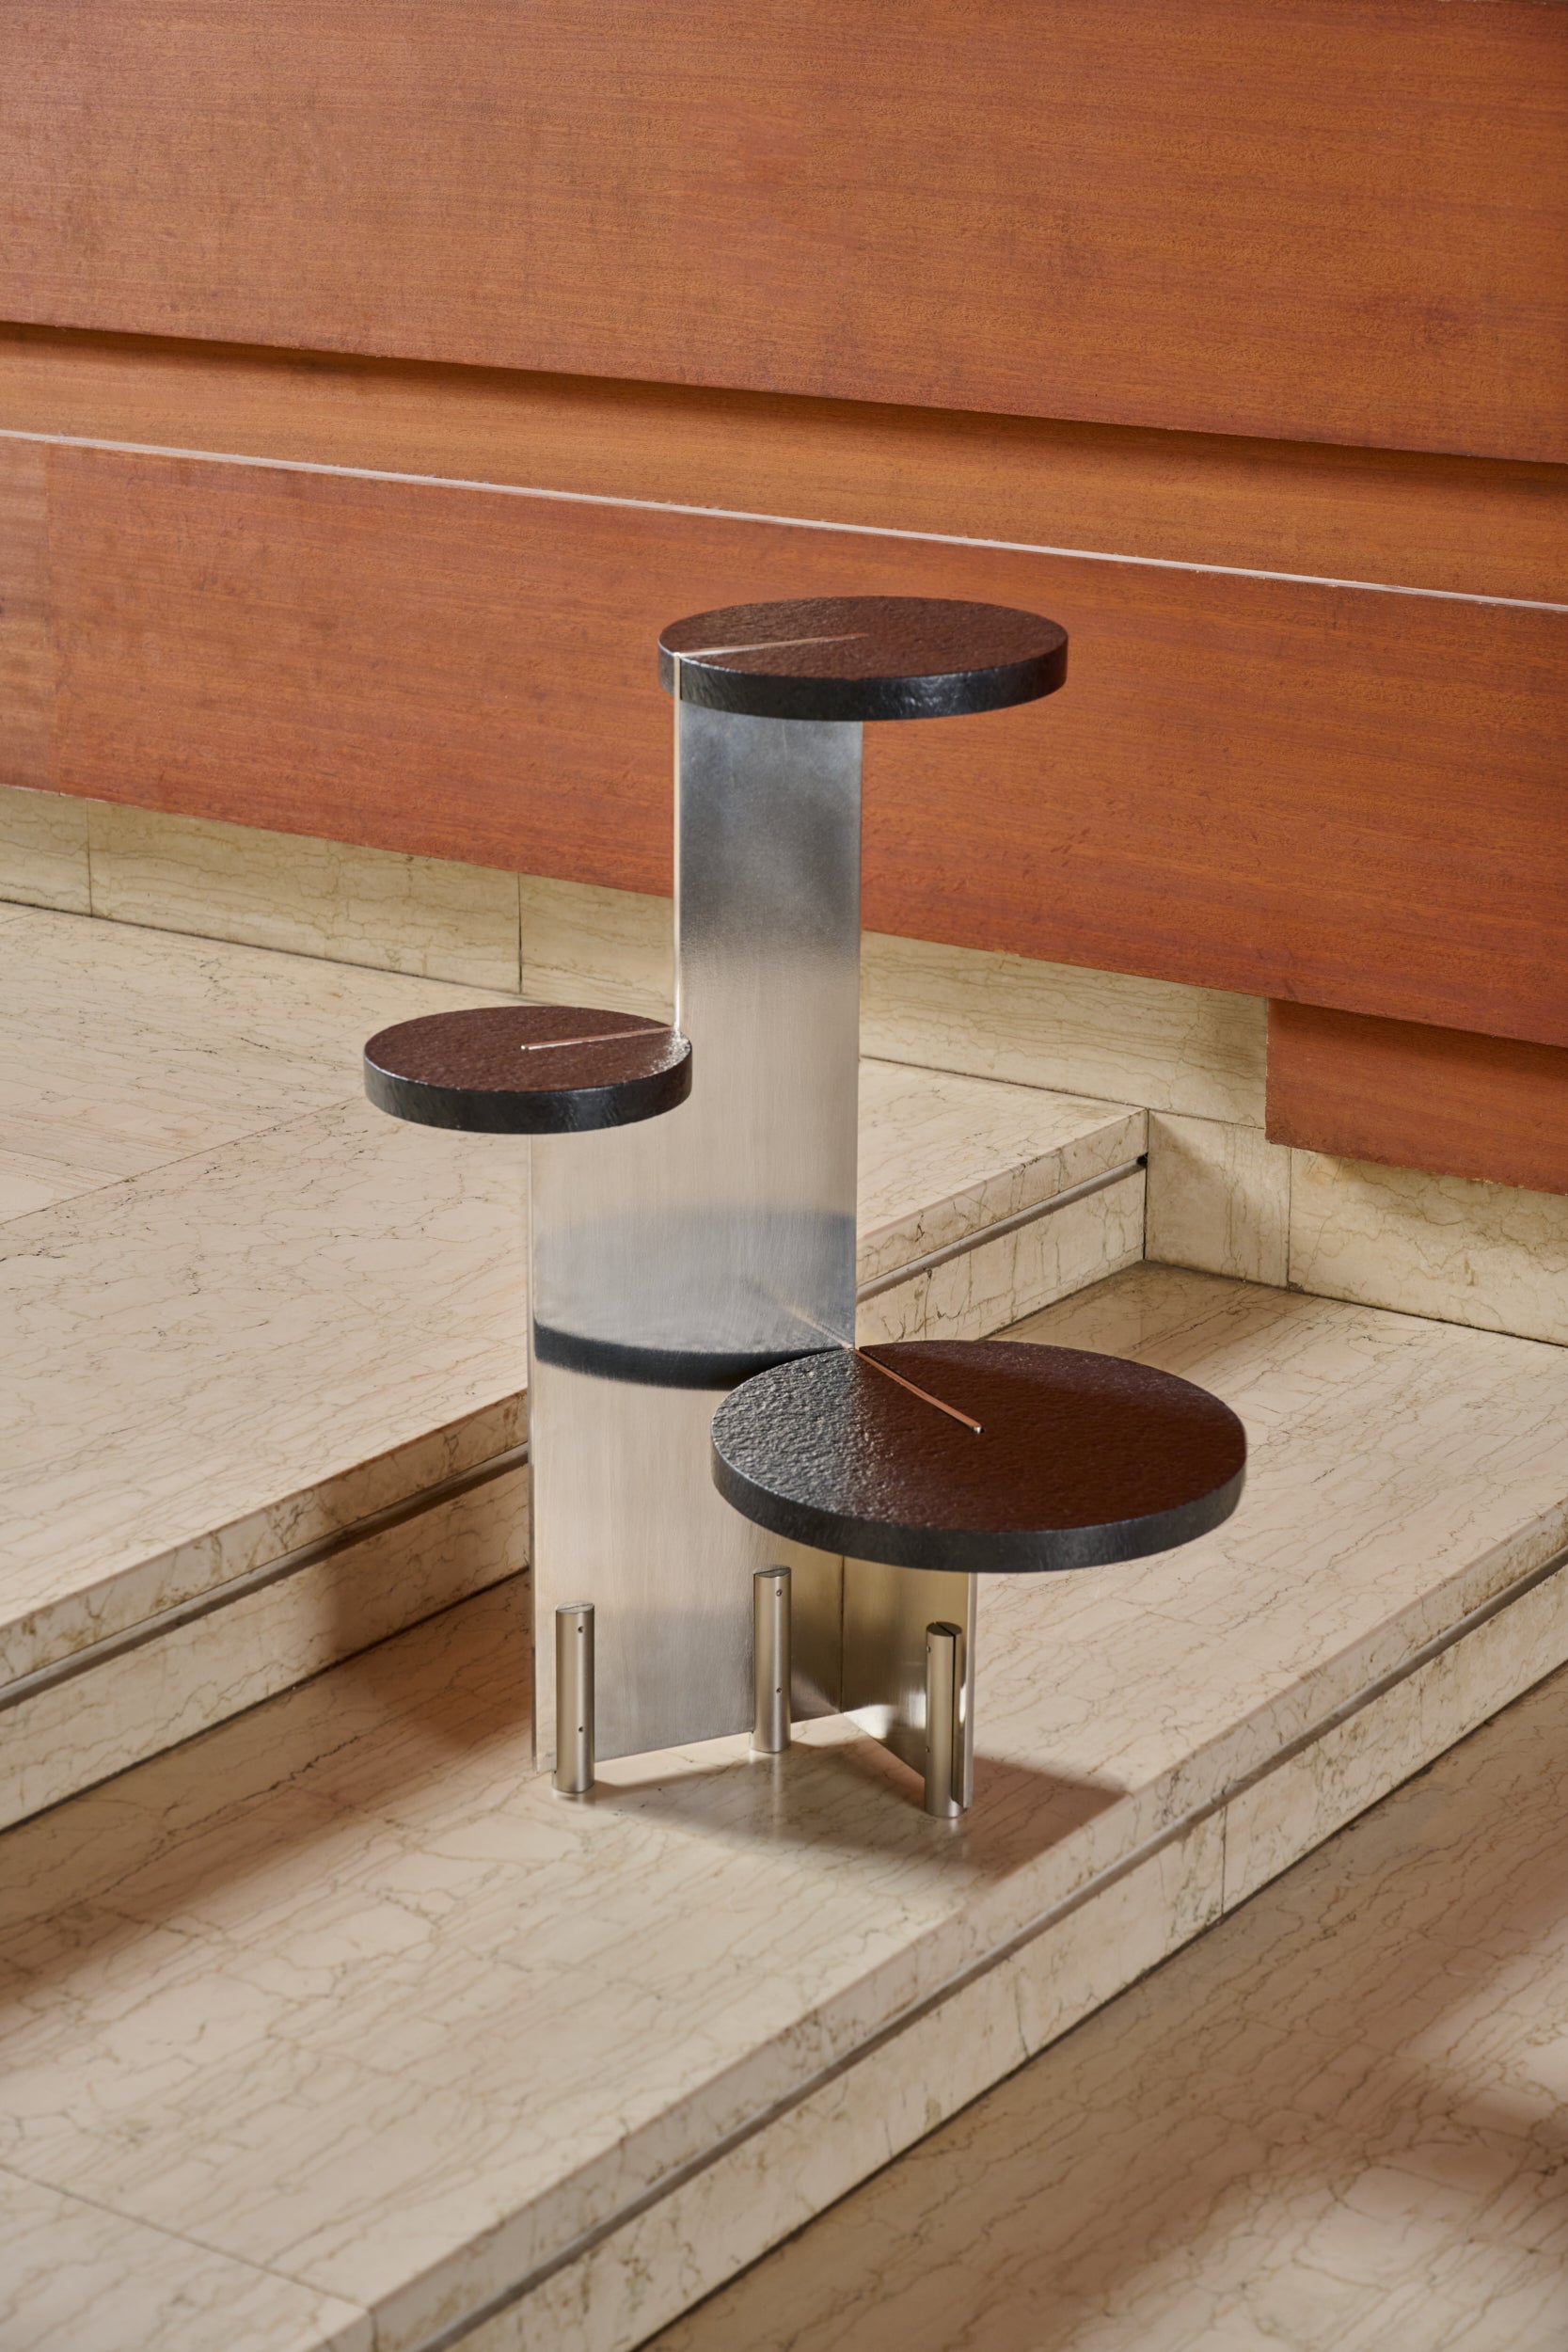 Our designer Multi Level Side Table provides playfulness and tangibility, highlighting the architectural character of the piece of furniture. Adorned in Semi matte Nickle, aged brass or powder coated effect and exuding elegance with granite and